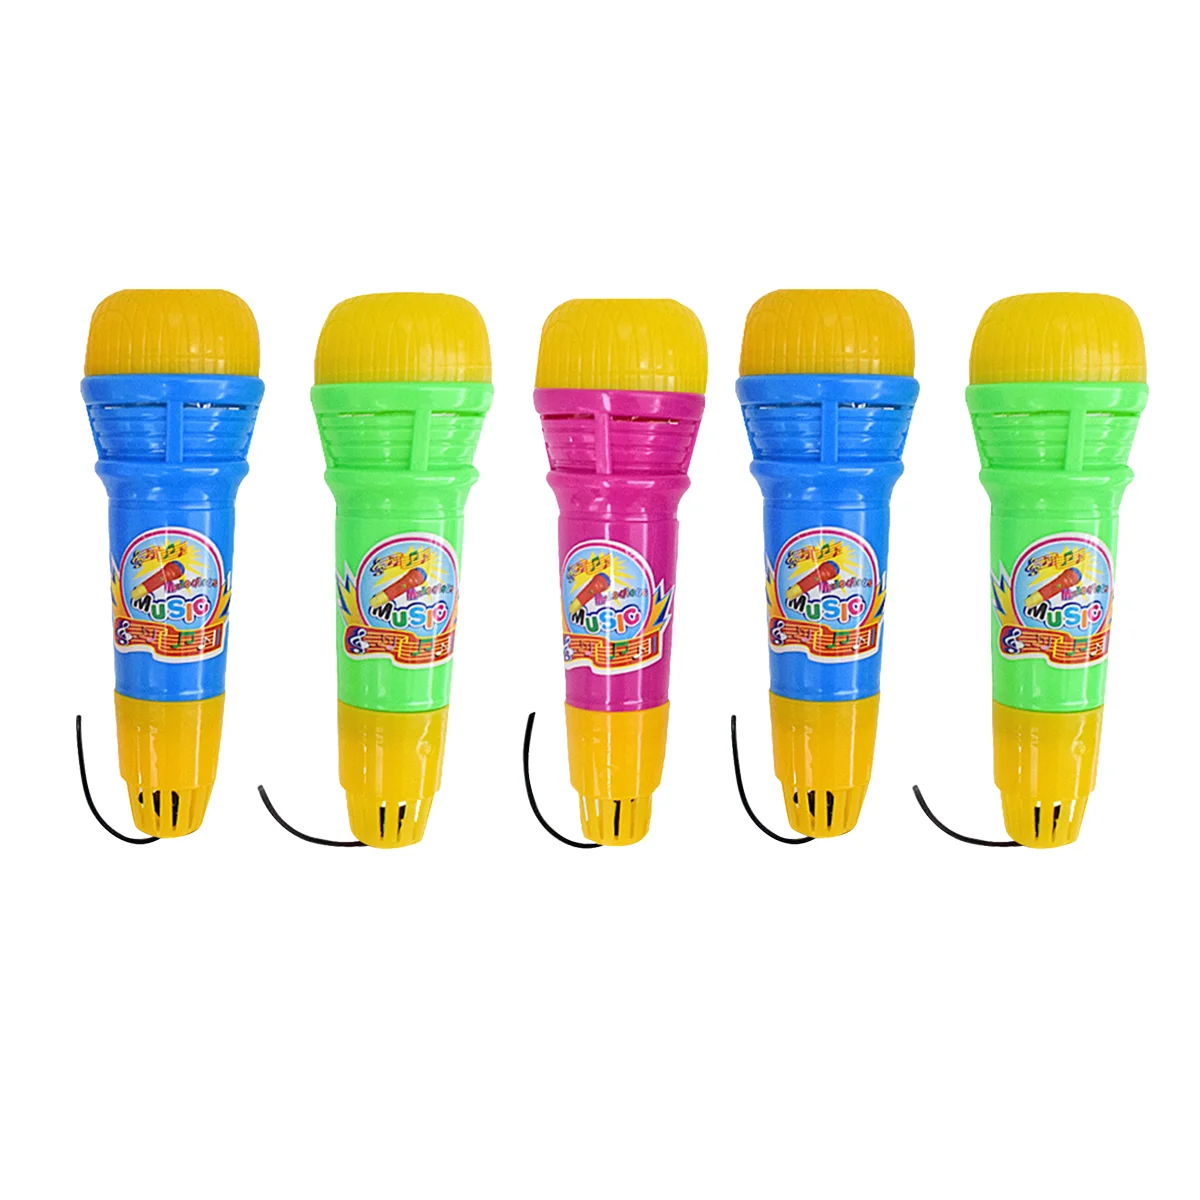 

Echo Microphone for Kids: 5pcs Voice Amplifying Microphone for Kids and Toddlers Singing Speech ( Mixed Color )